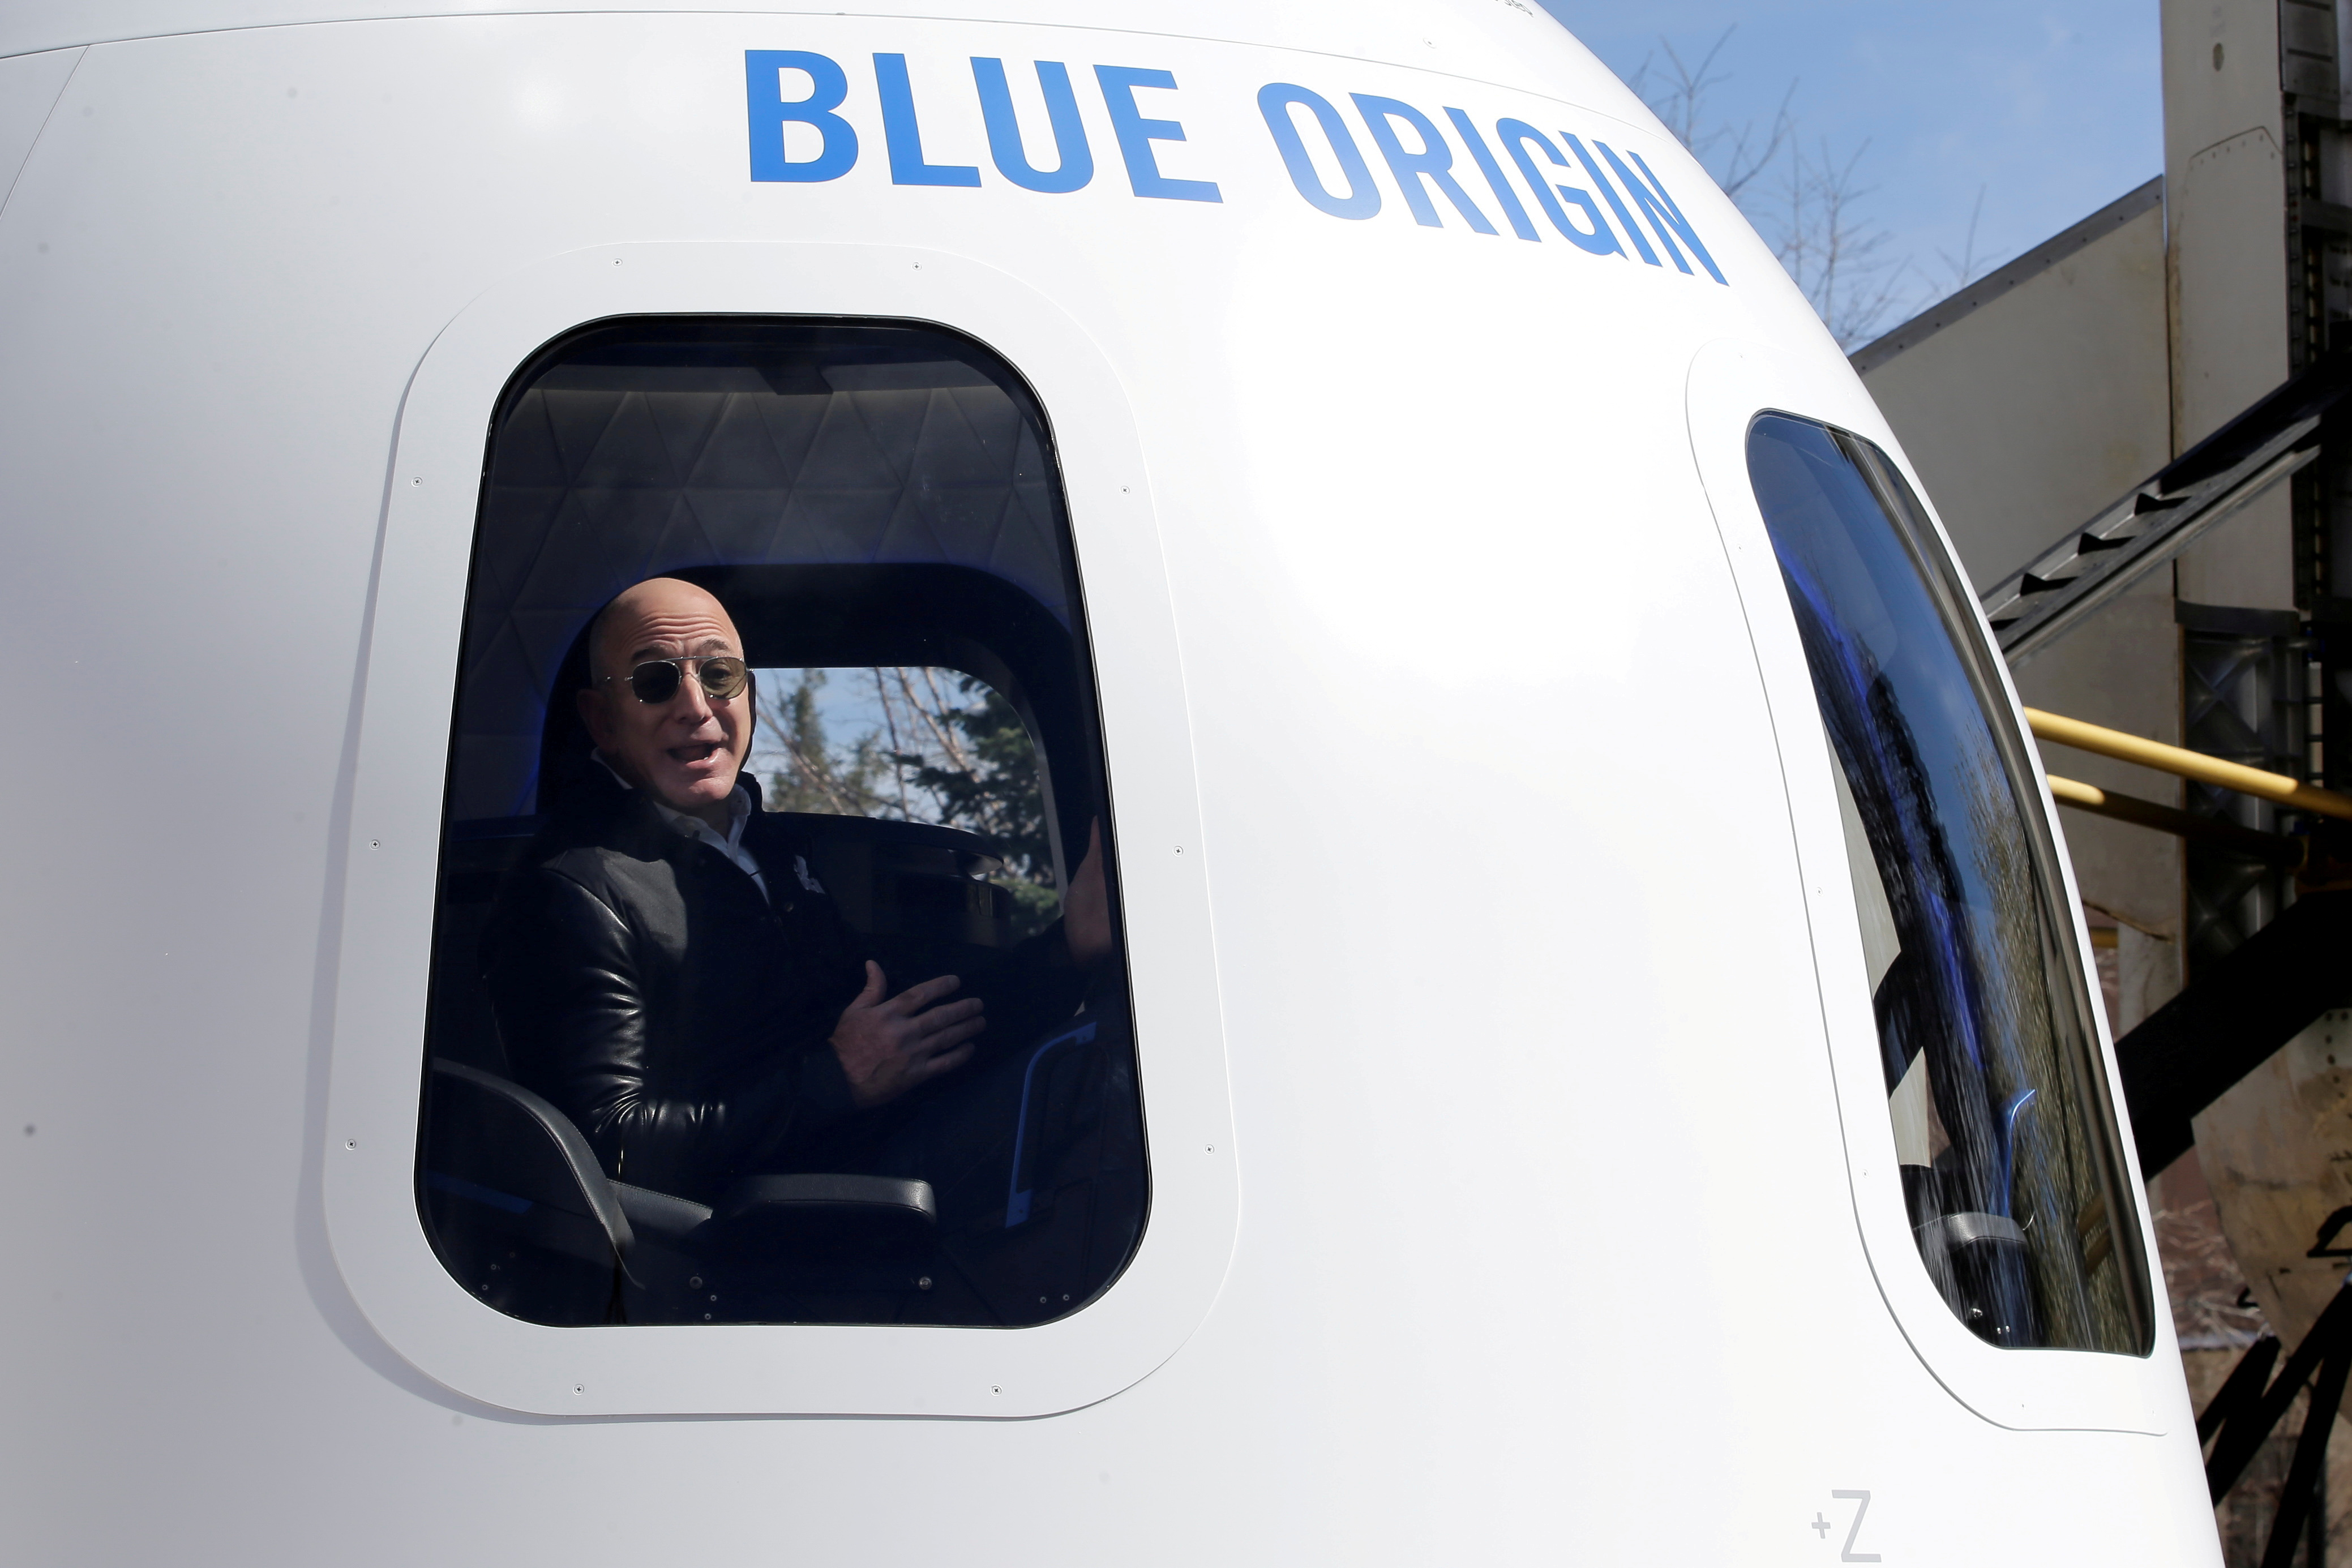 Amazon and Blue Origin founder Jeff Bezos addresses the media about the New Shepard rocket booster and Crew Capsule mockup at the 33rd Space Symposium in Colorado Springs